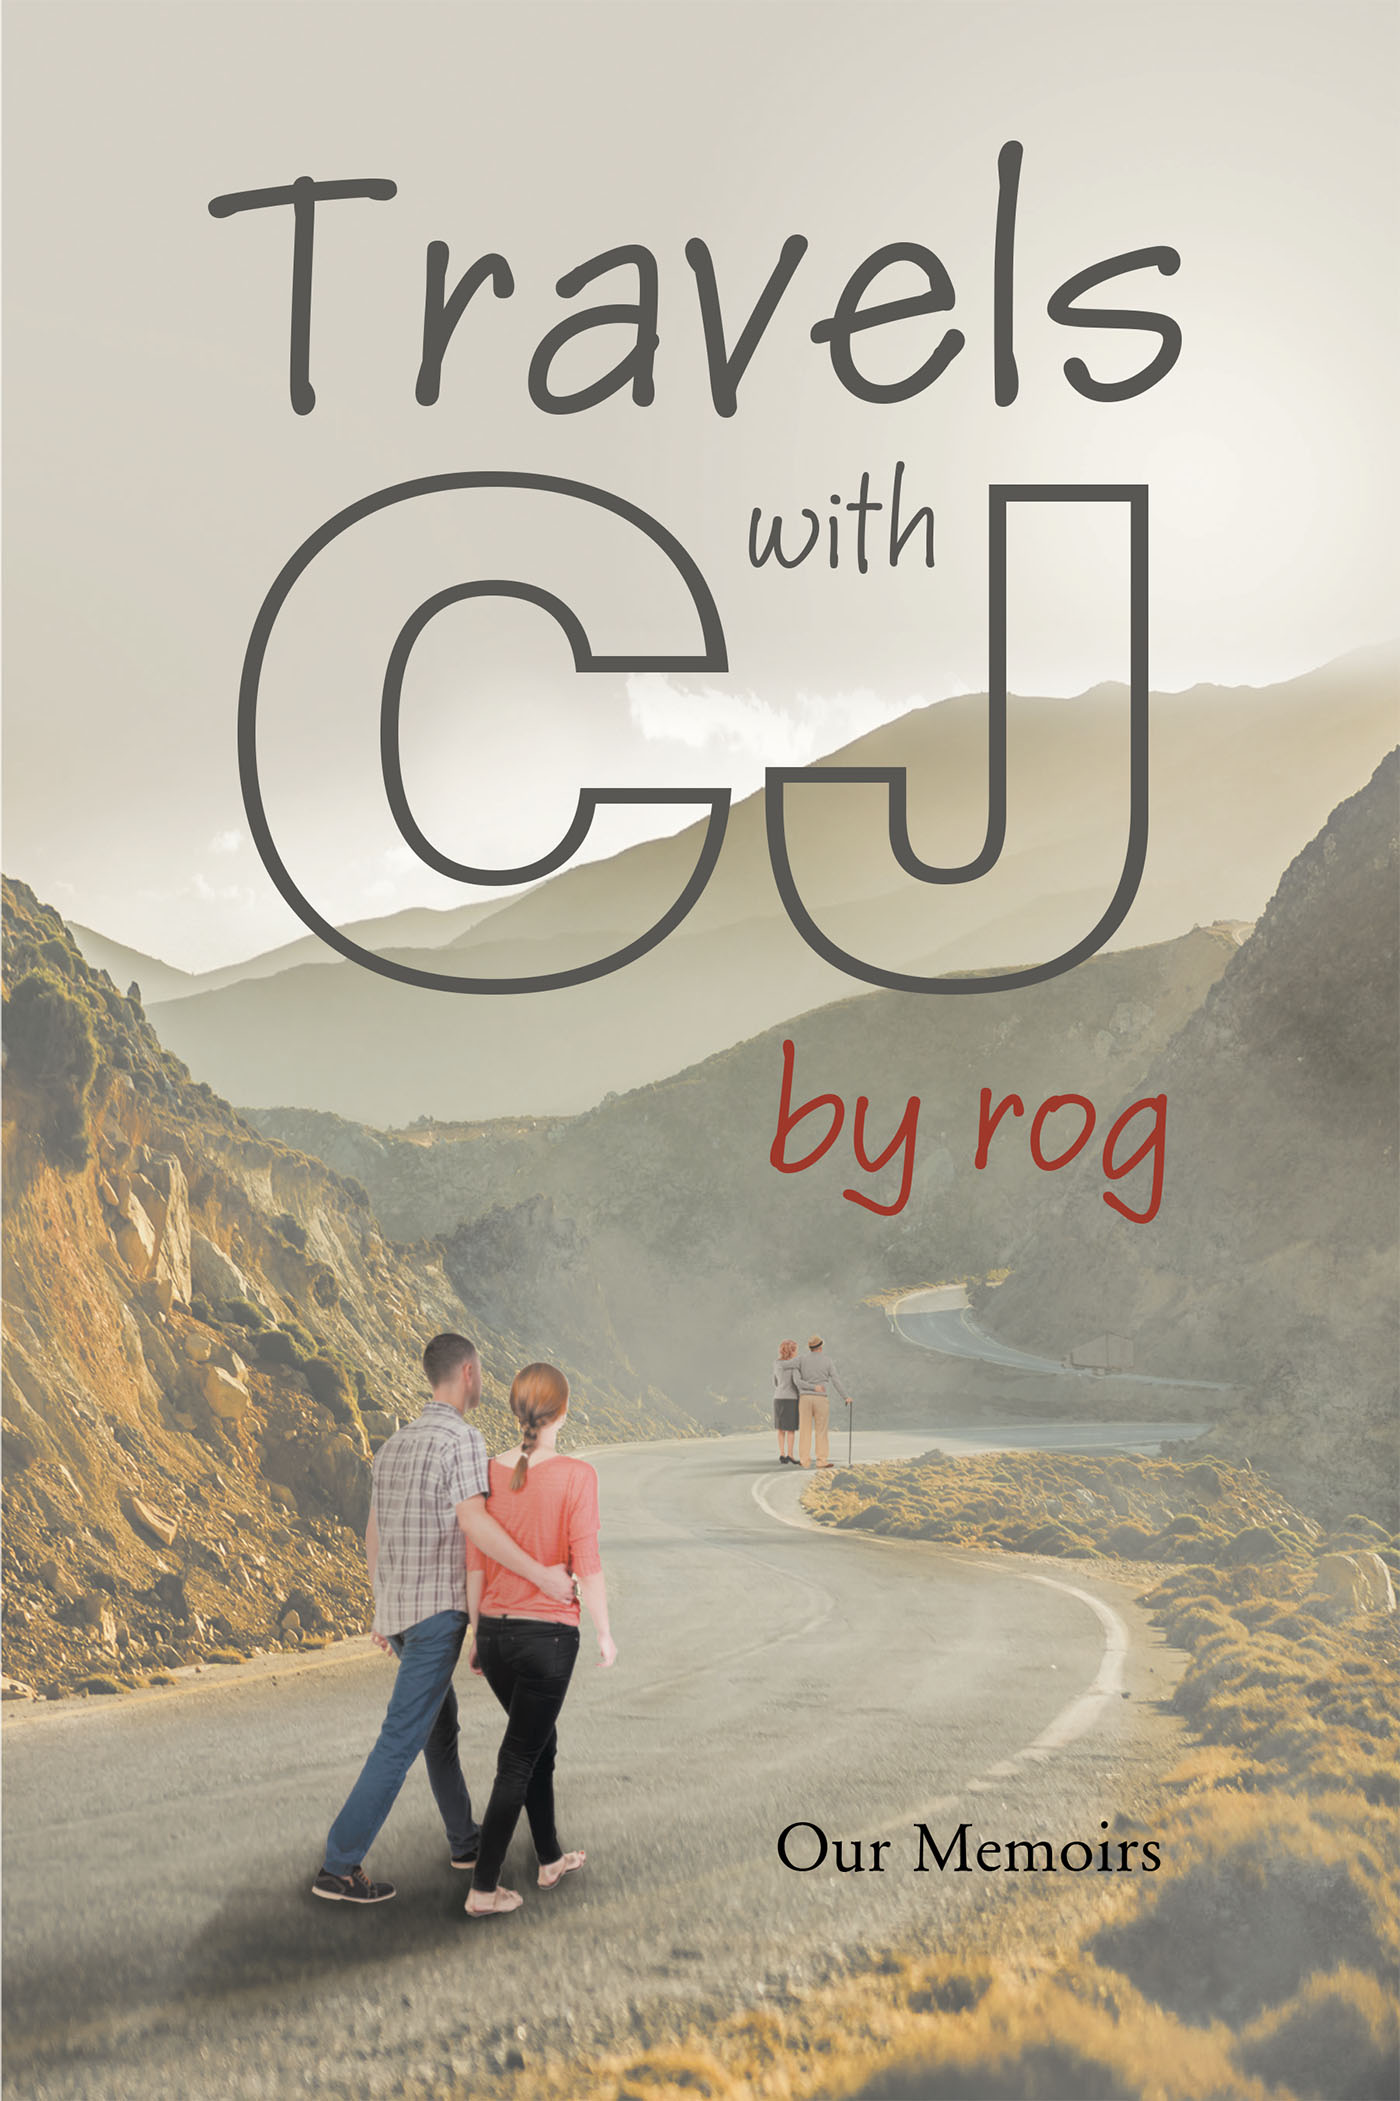 Travels with CJ by rog Cover Image